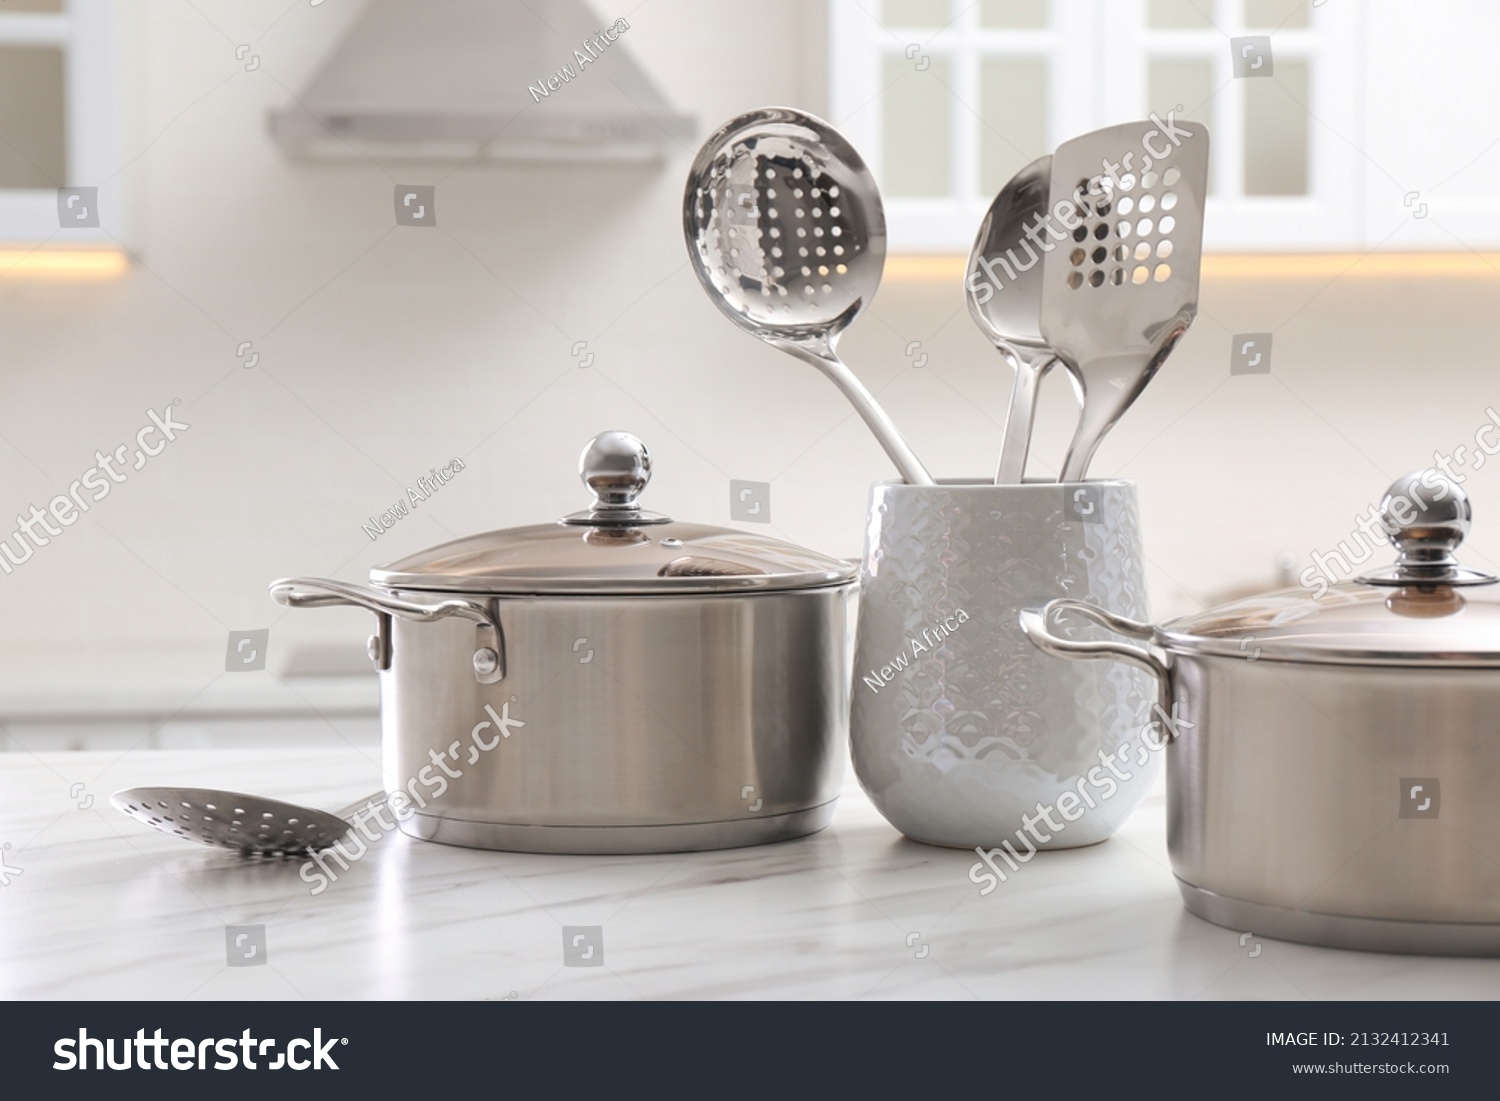 Stainless steel pots and kitchen utensils on white table indoors #2132412341